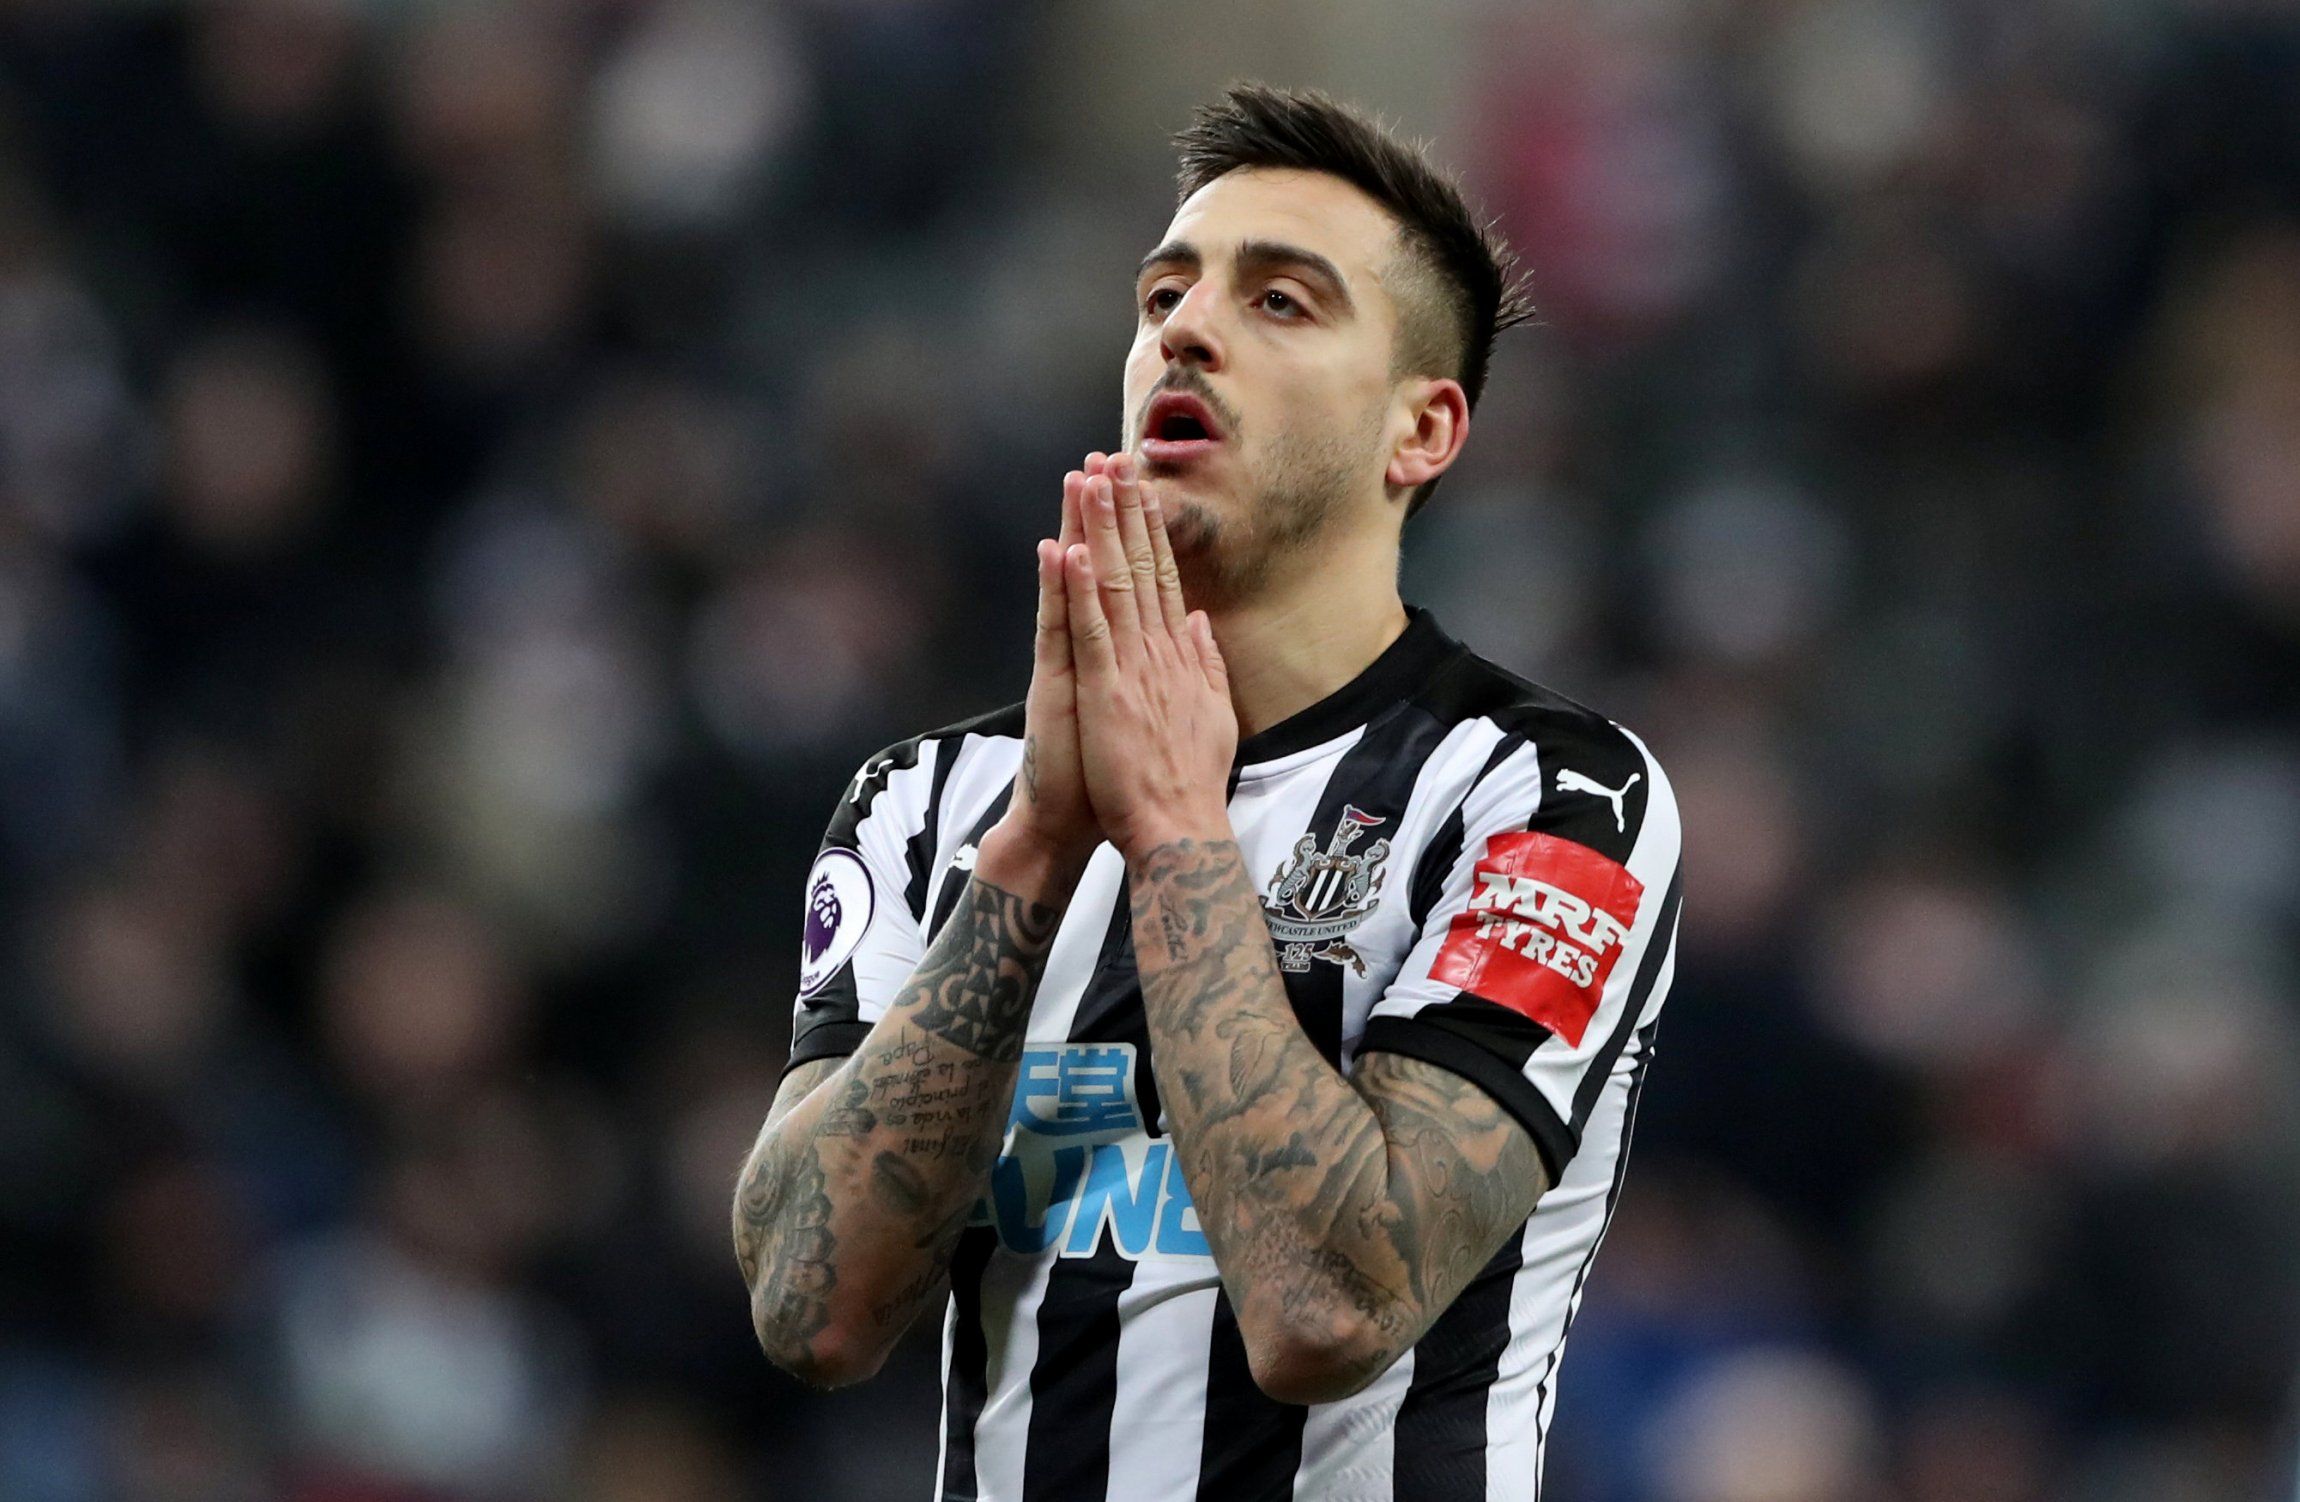 Newcastle striker Joselu reacts after missing chance